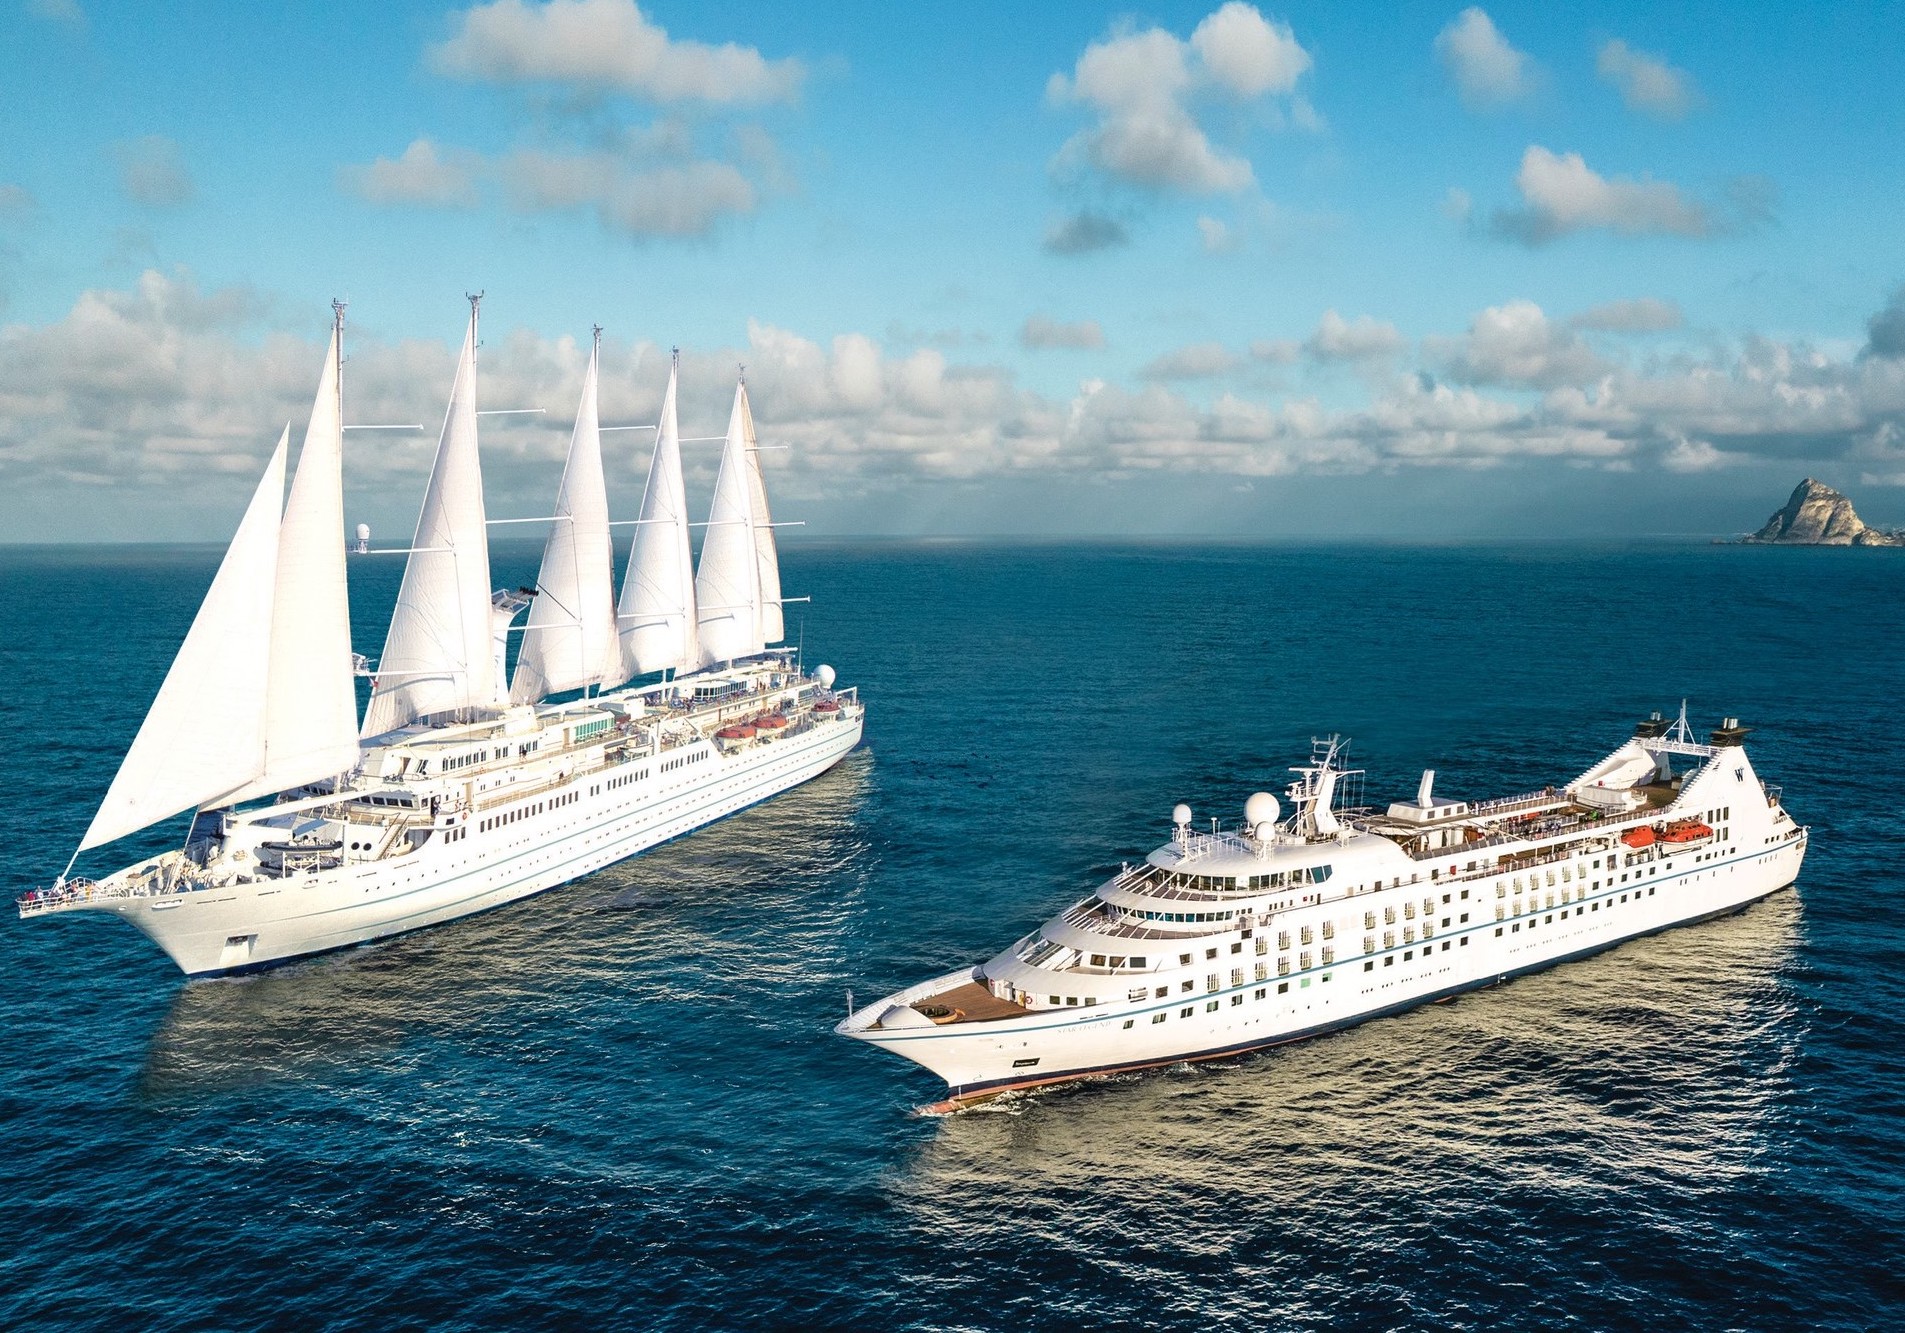 Small ship cruise line Windstar Cruises will present an all-female lineup of James Beard Foundation-affiliated guest chefs for its series of three themed culinary cruises in 2022.